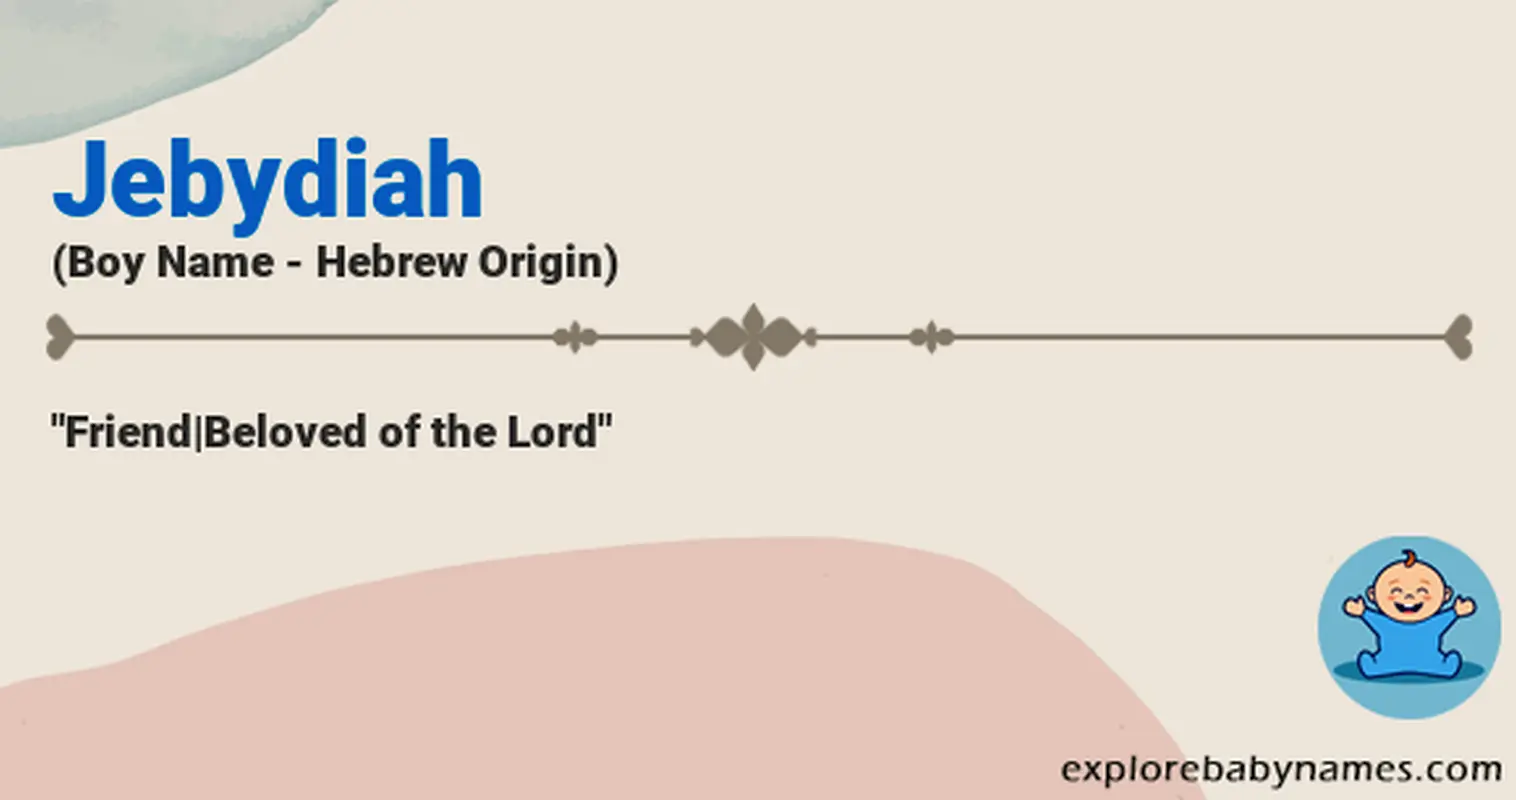 Meaning of Jebydiah